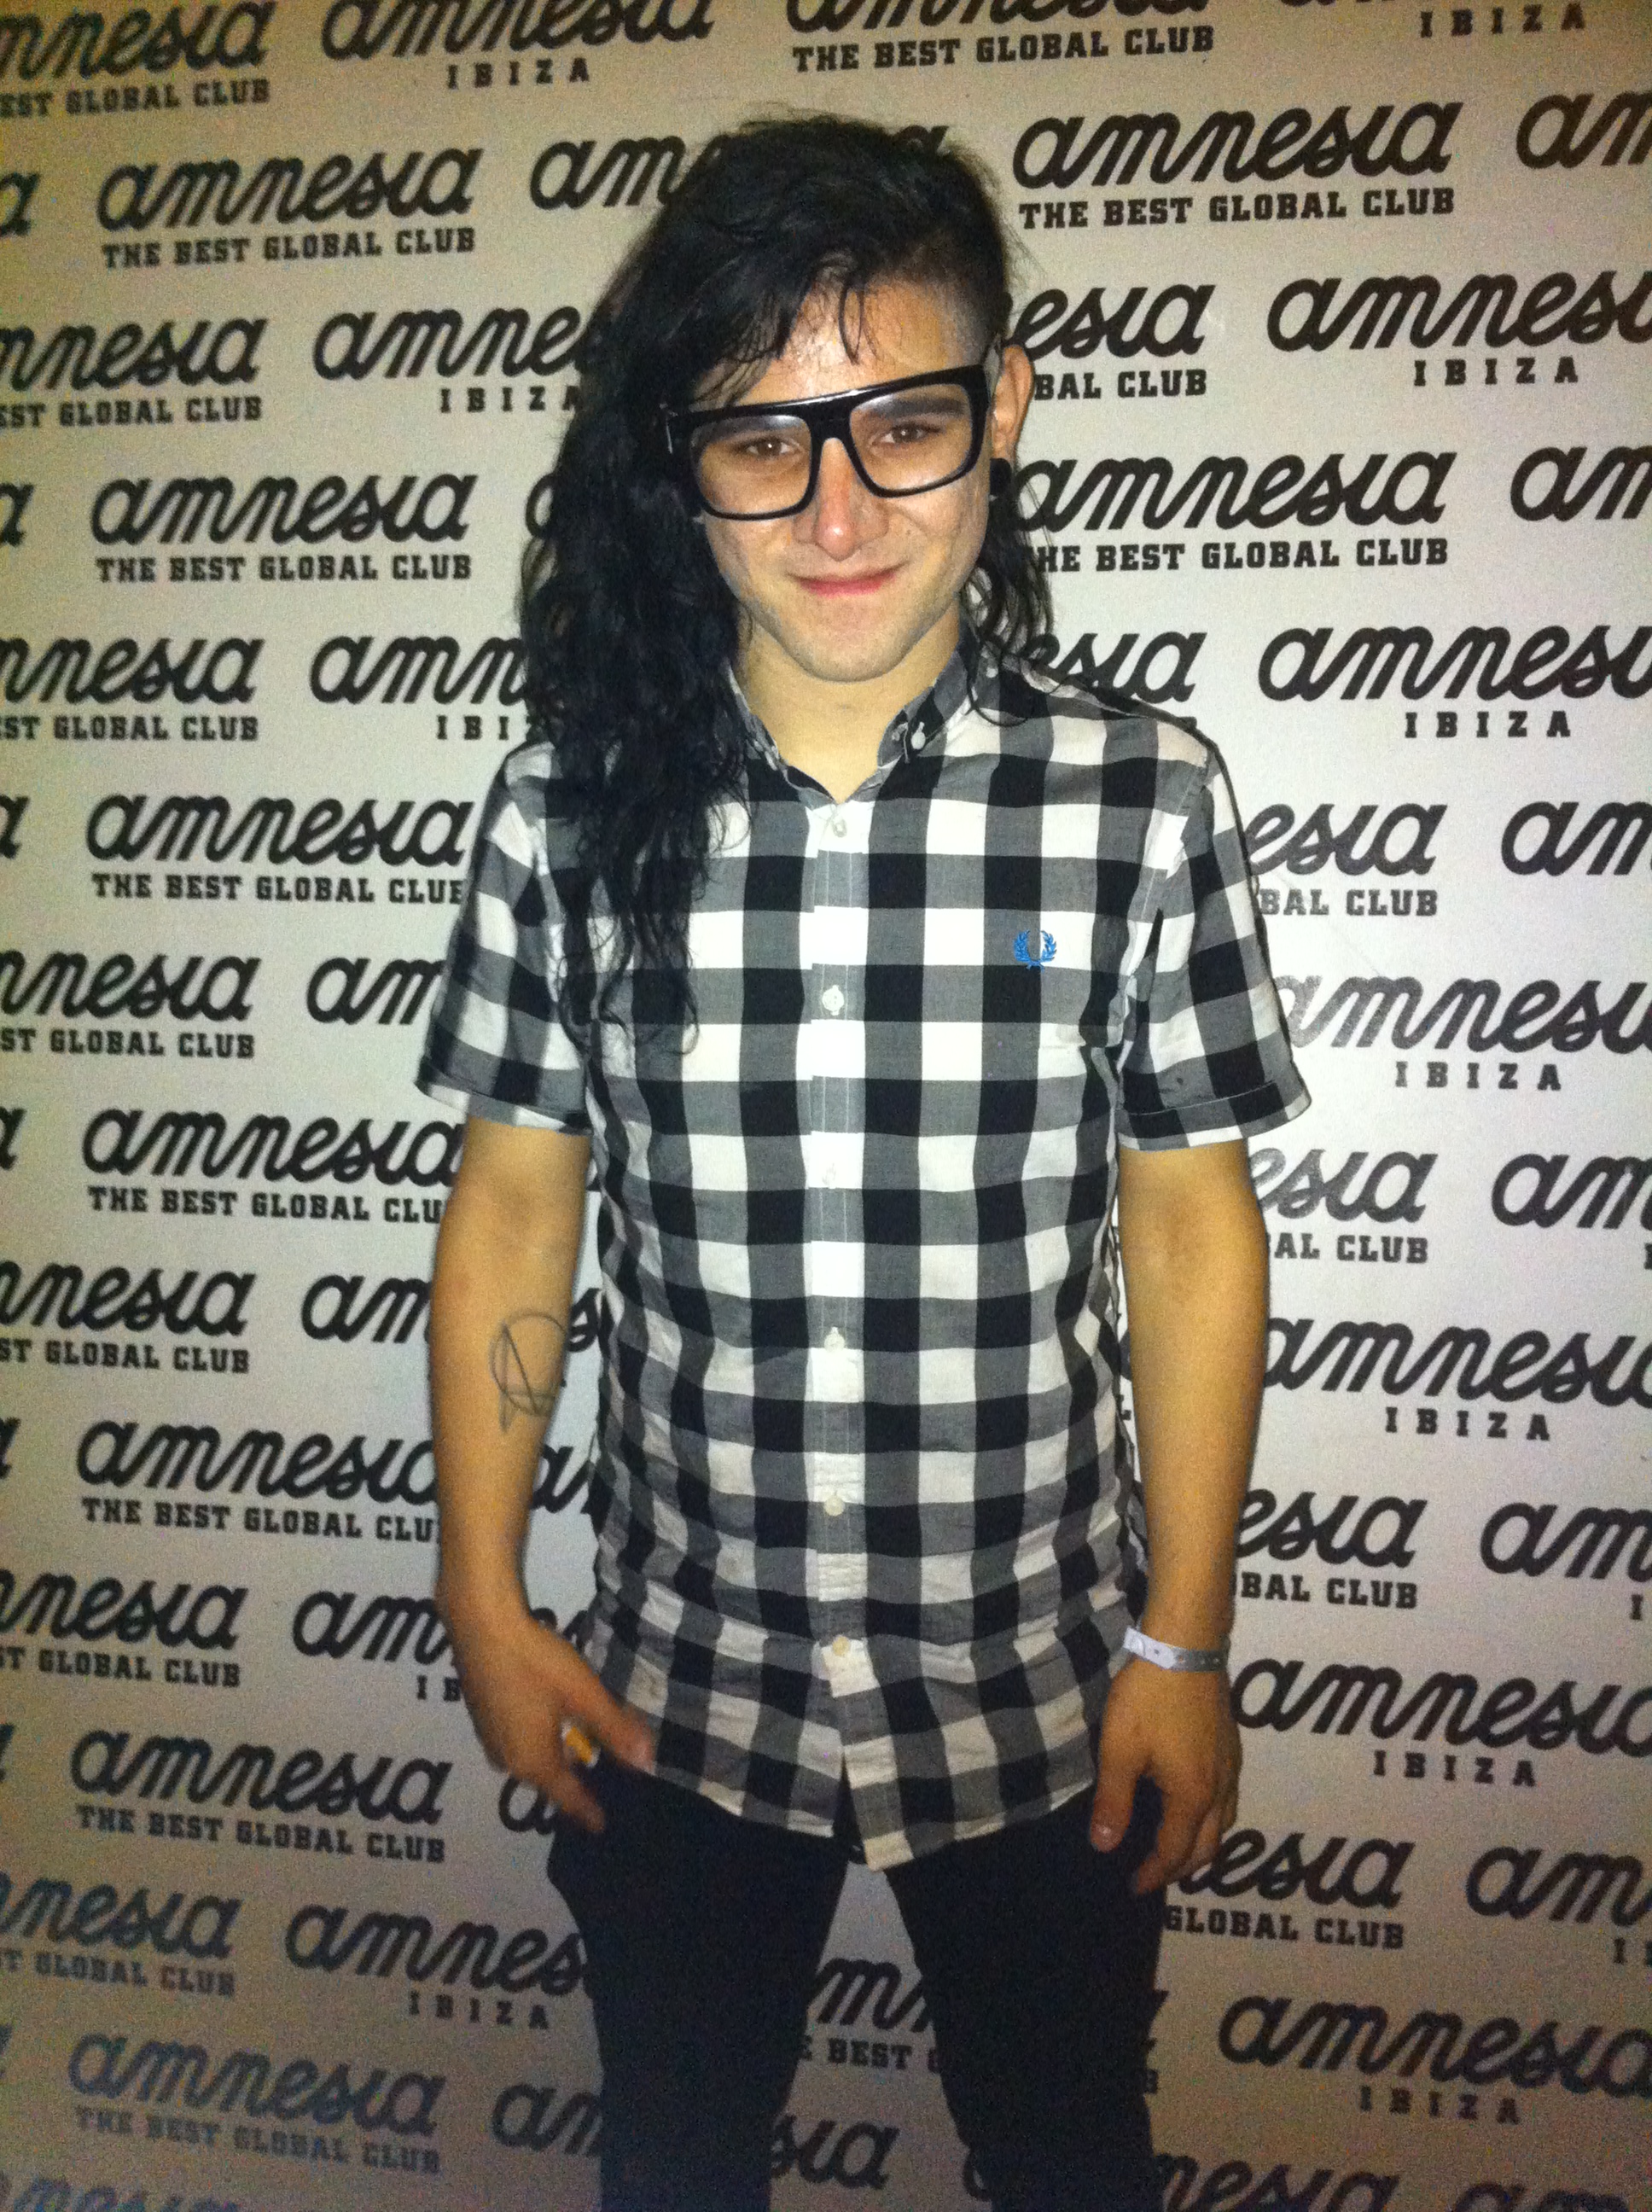 Skrillex, American DJ and producer was born on January 15, 1988.